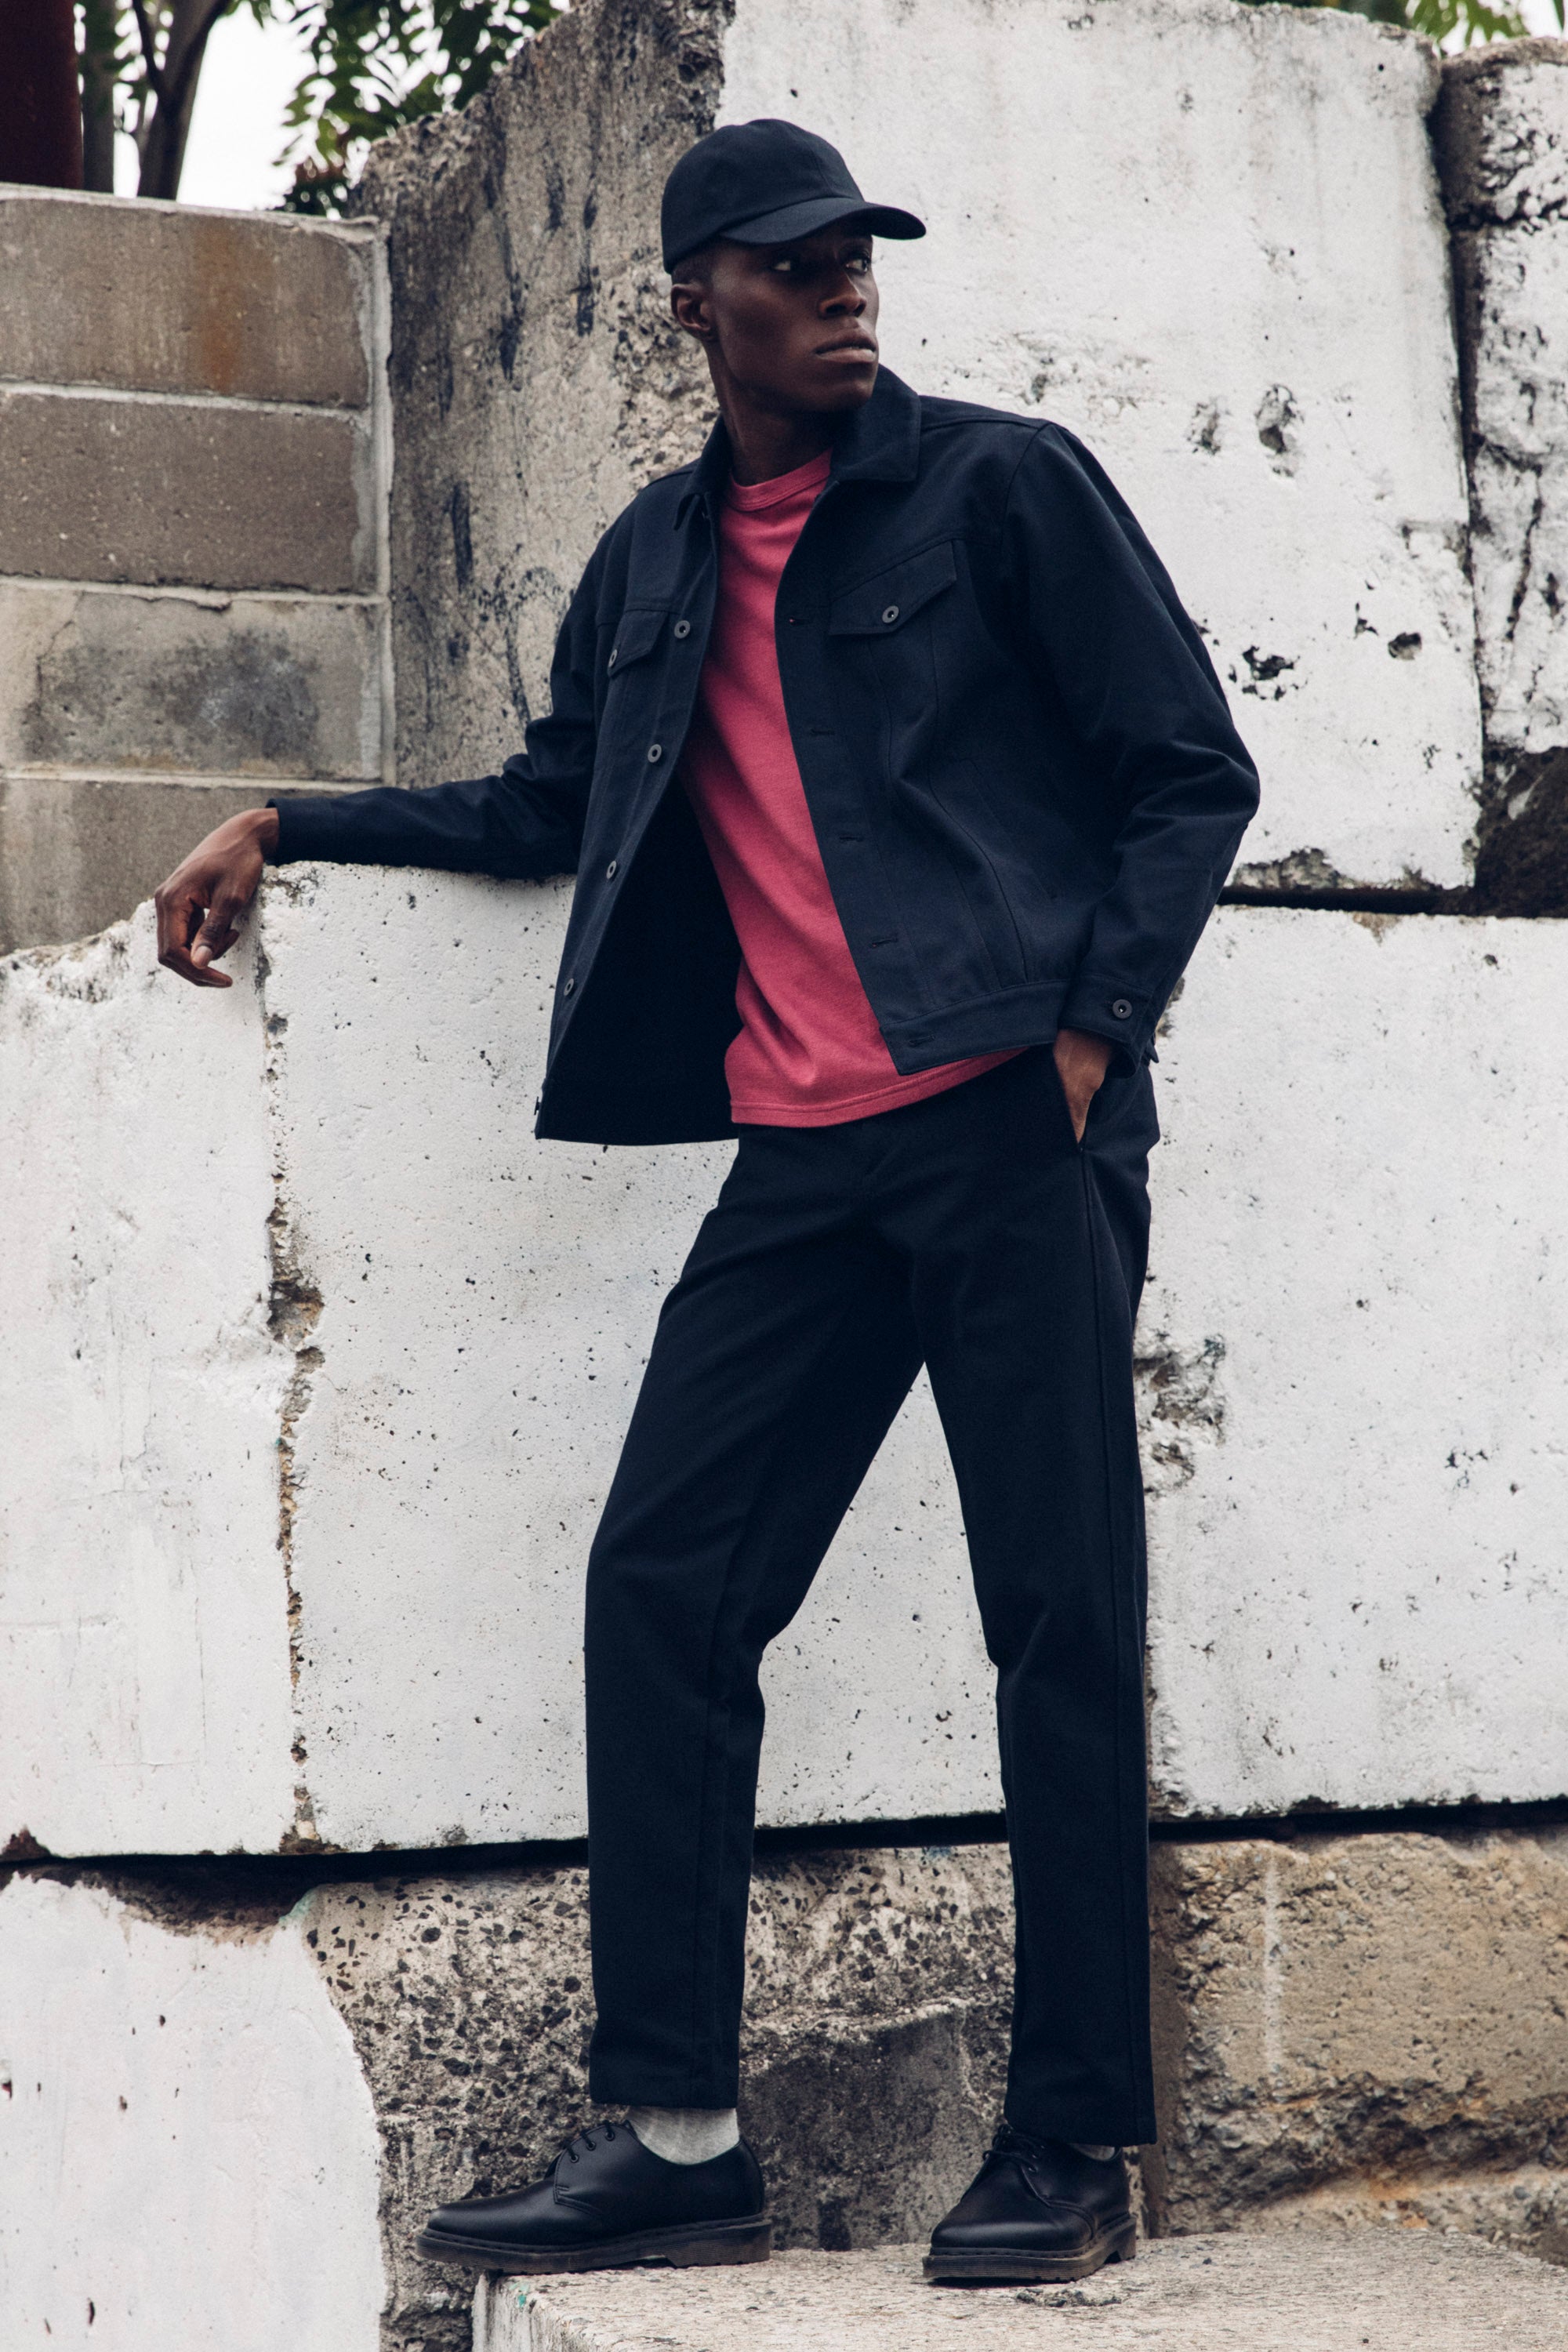 Edem in the Washed Black Duckworks with a Duckcap and a Duckcloth Shank Jacket, outdoors leaning on concrete blocks